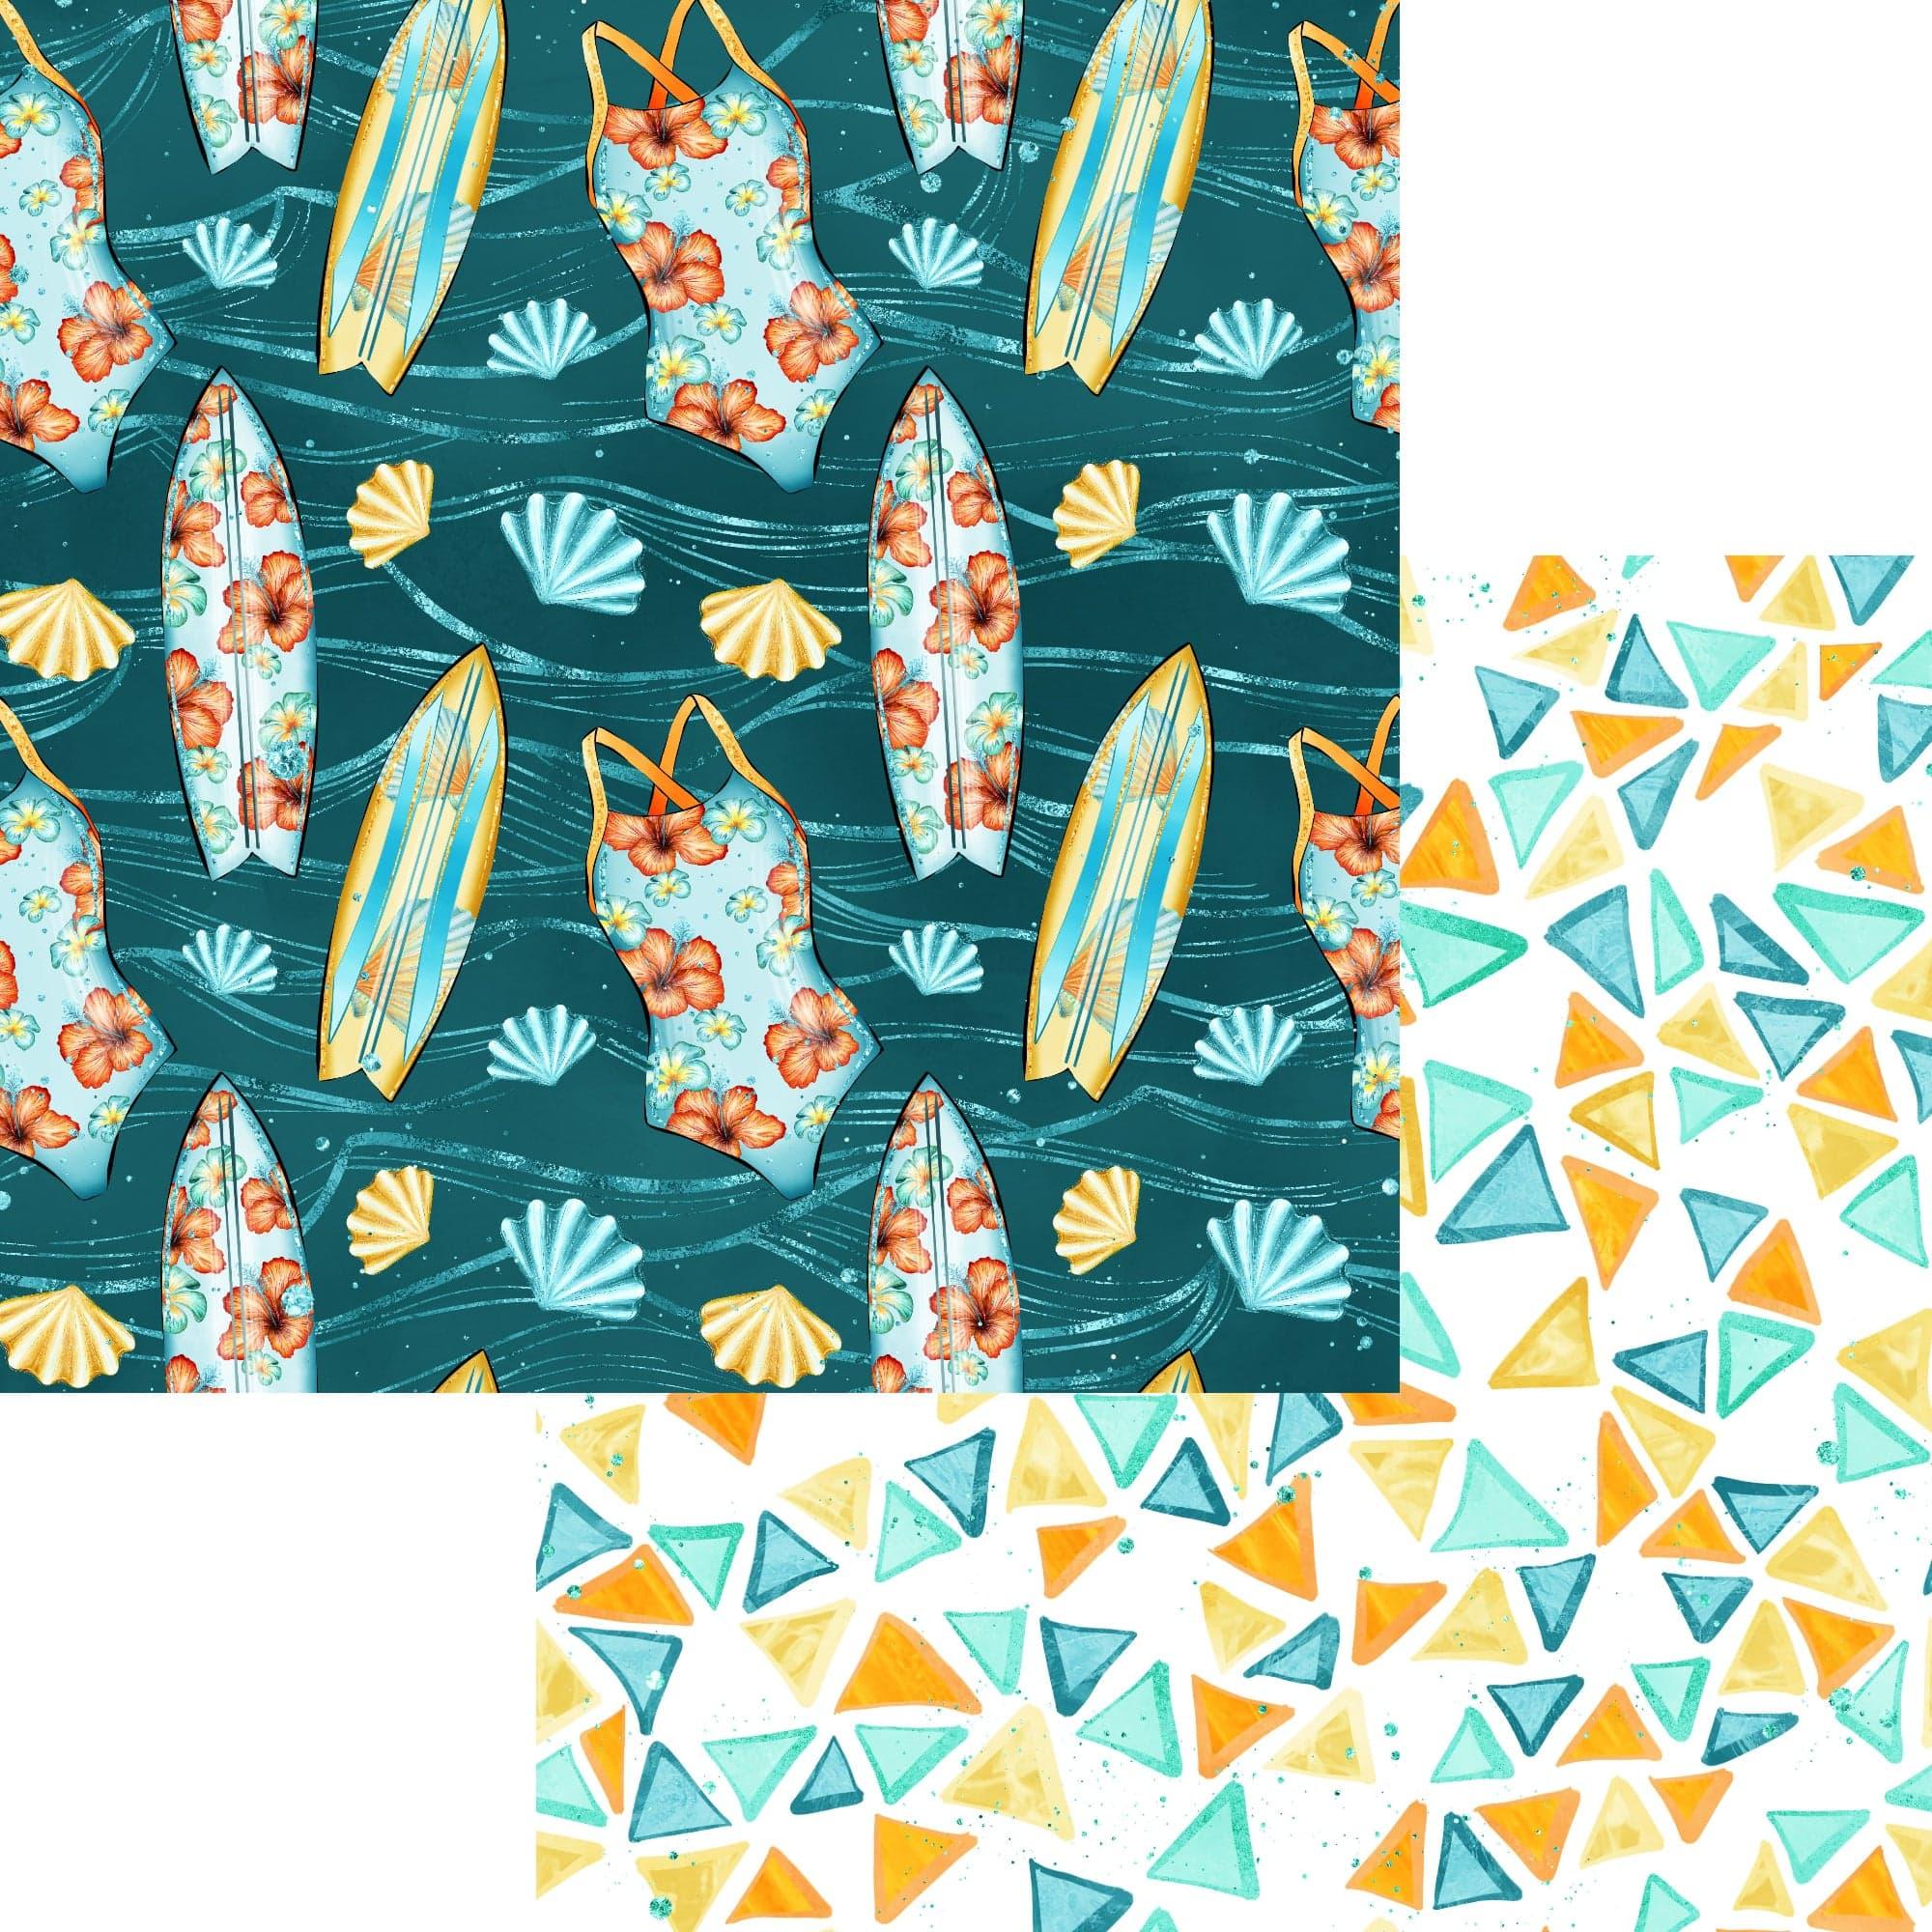  Tropics Collection Oahu 12 x 12 Double-Sided Scrapbook Paper by SSC Designs - Scrapbook Supply Companies